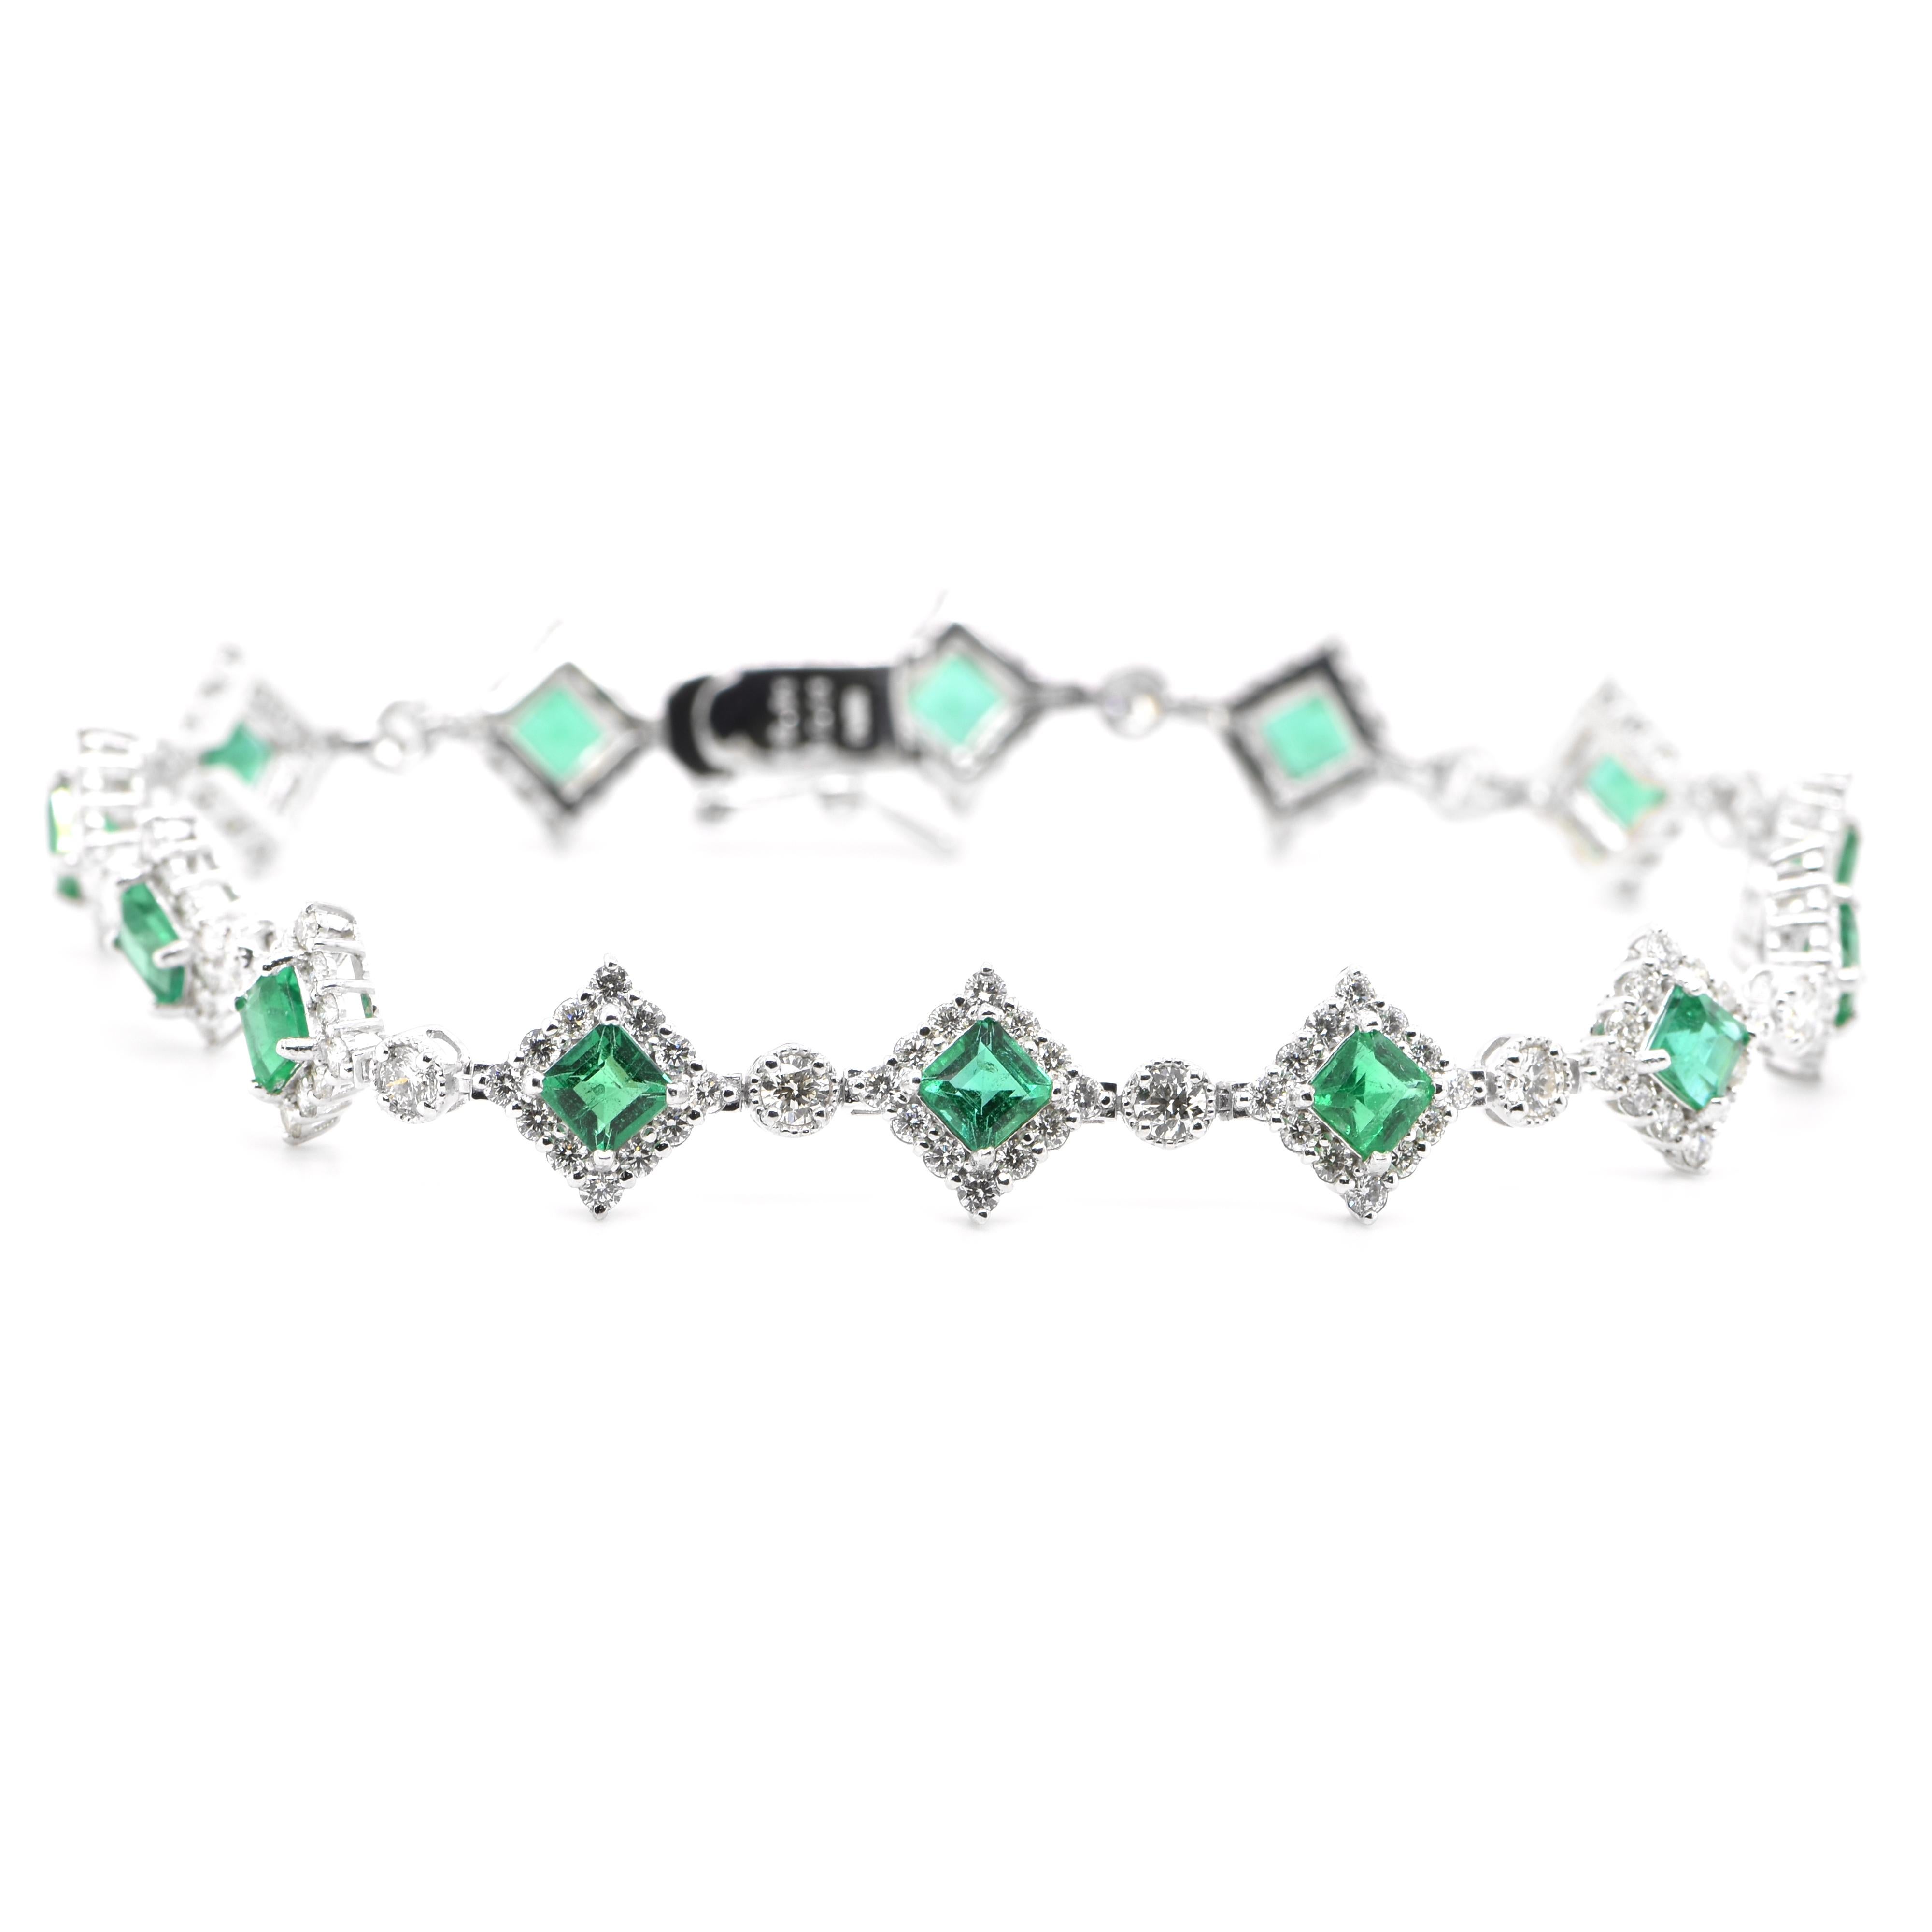 A beautiful Tennis Bracelet featuring a total of 2.91 Carats of Natural Emeralds and 2.41 Carats of Diamond Accents set in Platinum. The Emerald are of 5x3mm size. People have admired emerald’s green for thousands of years. Emeralds have always been